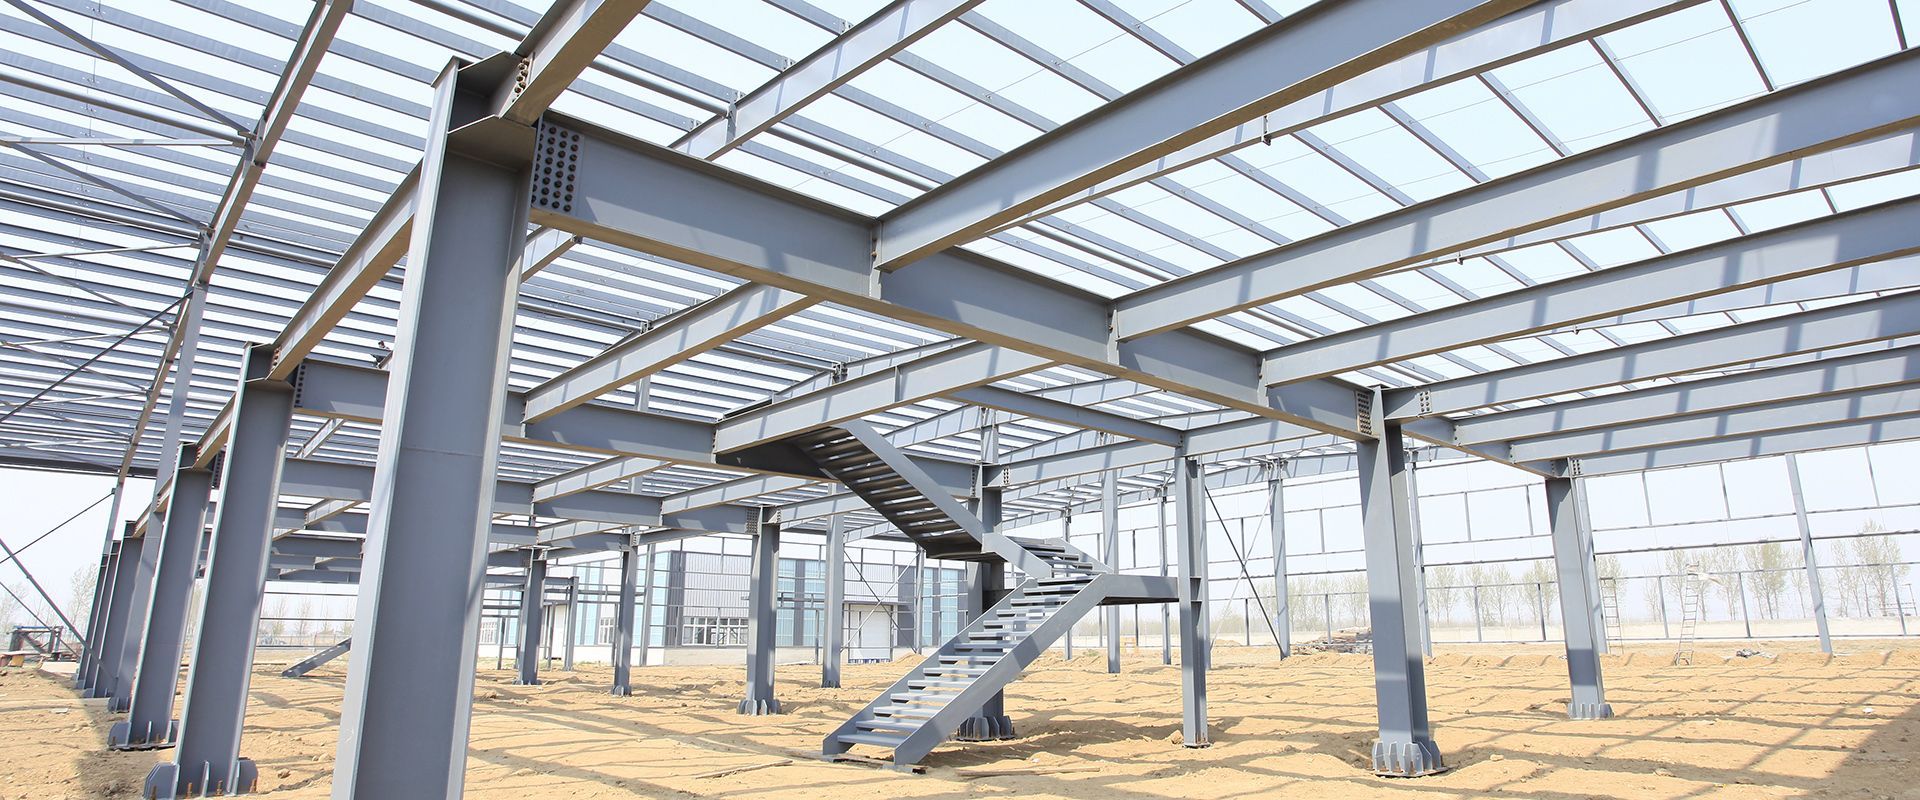 Construction using steel building systems is sustainable, recyclable and better for the planet.